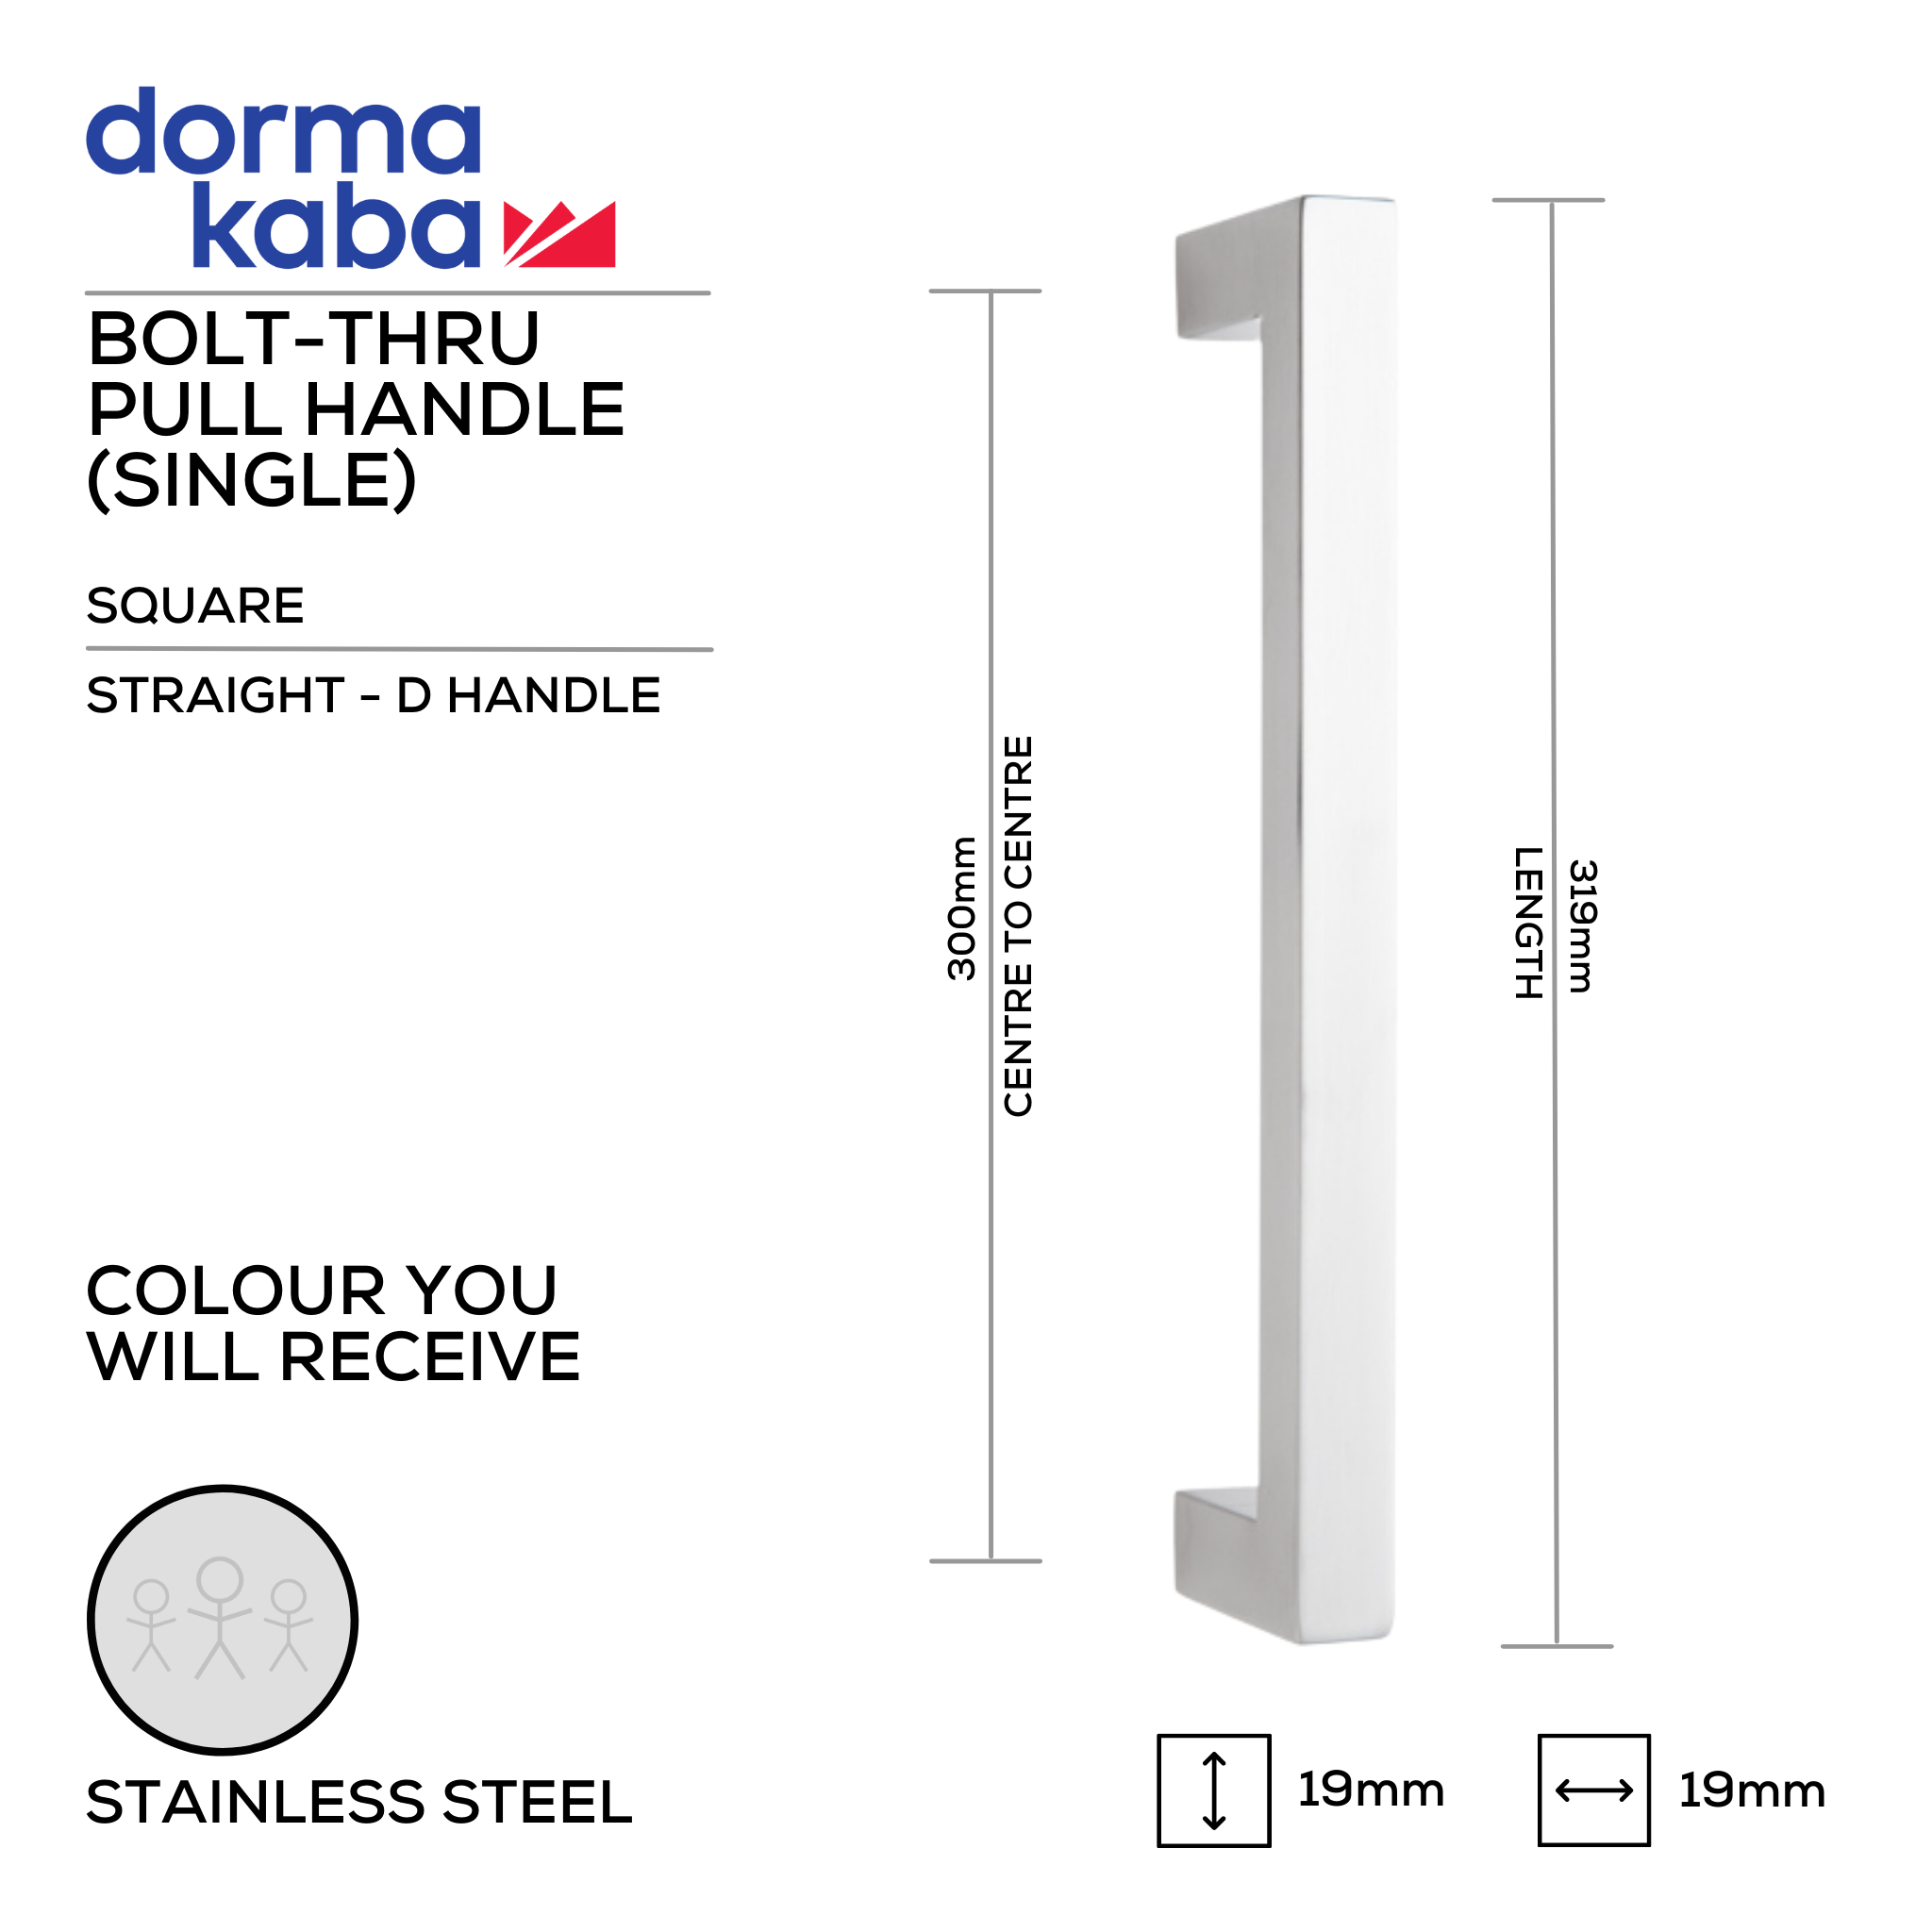 DSQ 06H 300 BT, Pull Handle, Square, Straight, D Handle, BoltThru, 19mm (d) x 319mm (l) x 300mm (ctc), Stainless Steel, DORMAKABA